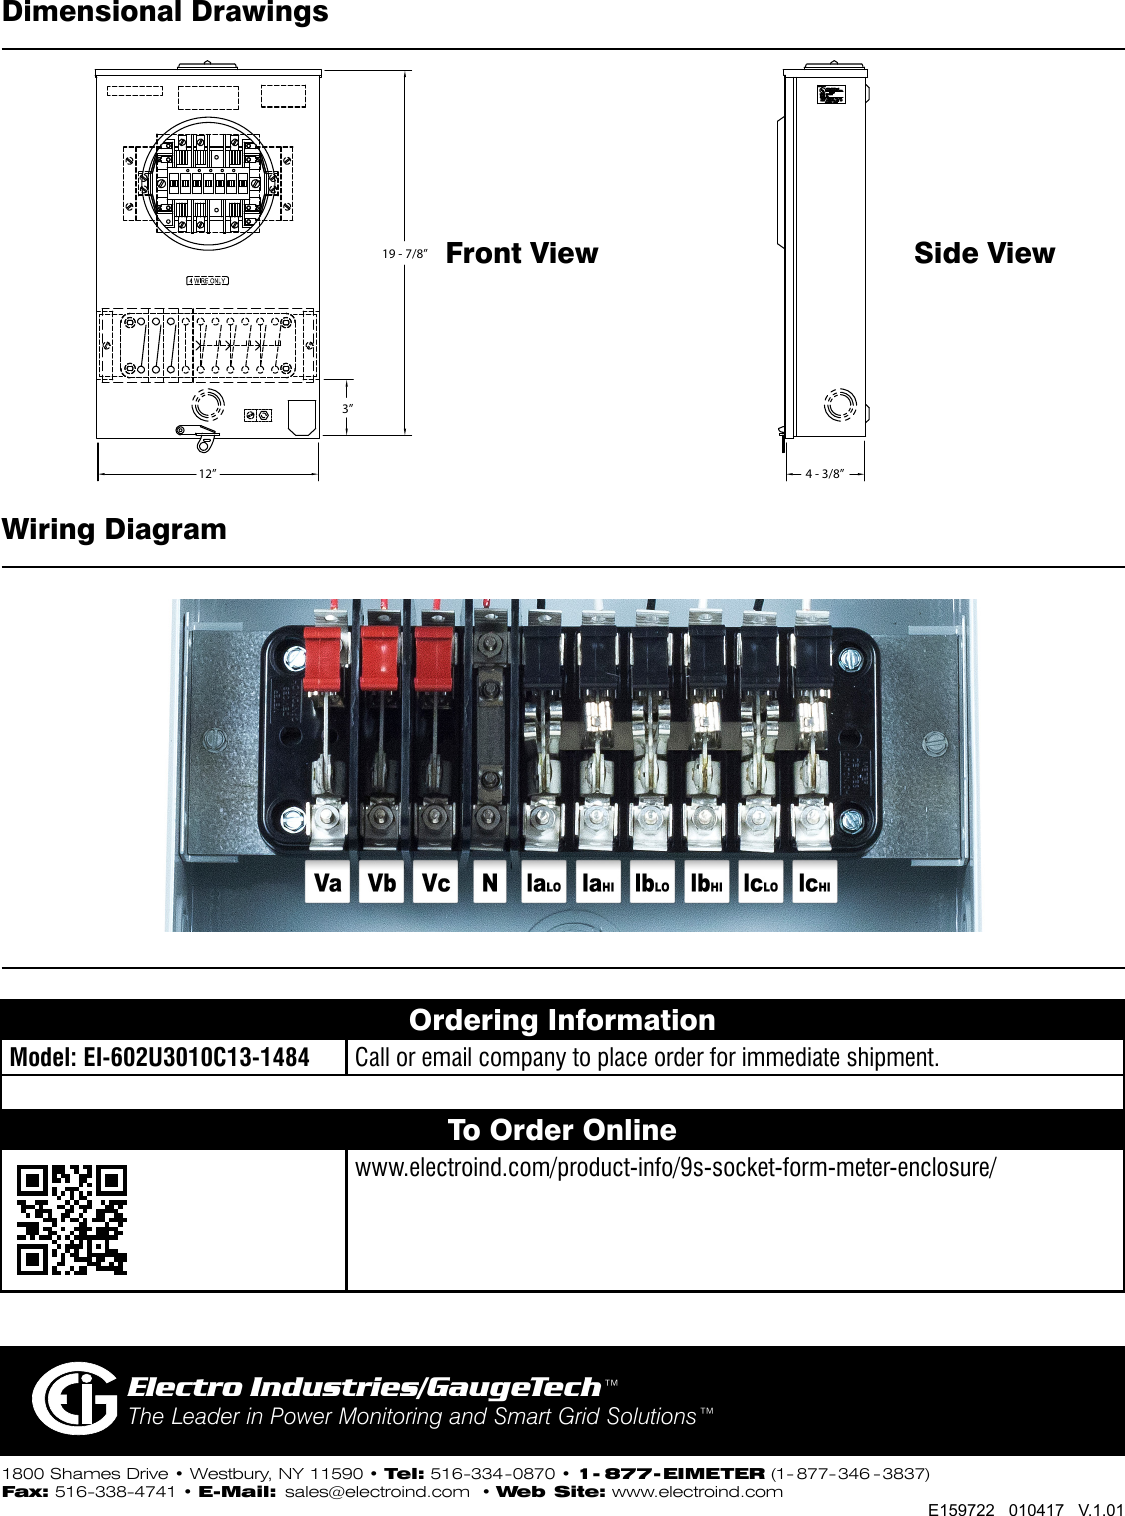 Page 2 of 2 - E159722-Pre-Wired-Enclosure-for-9S-Base-Meters-brochure-010417 V1 01-web